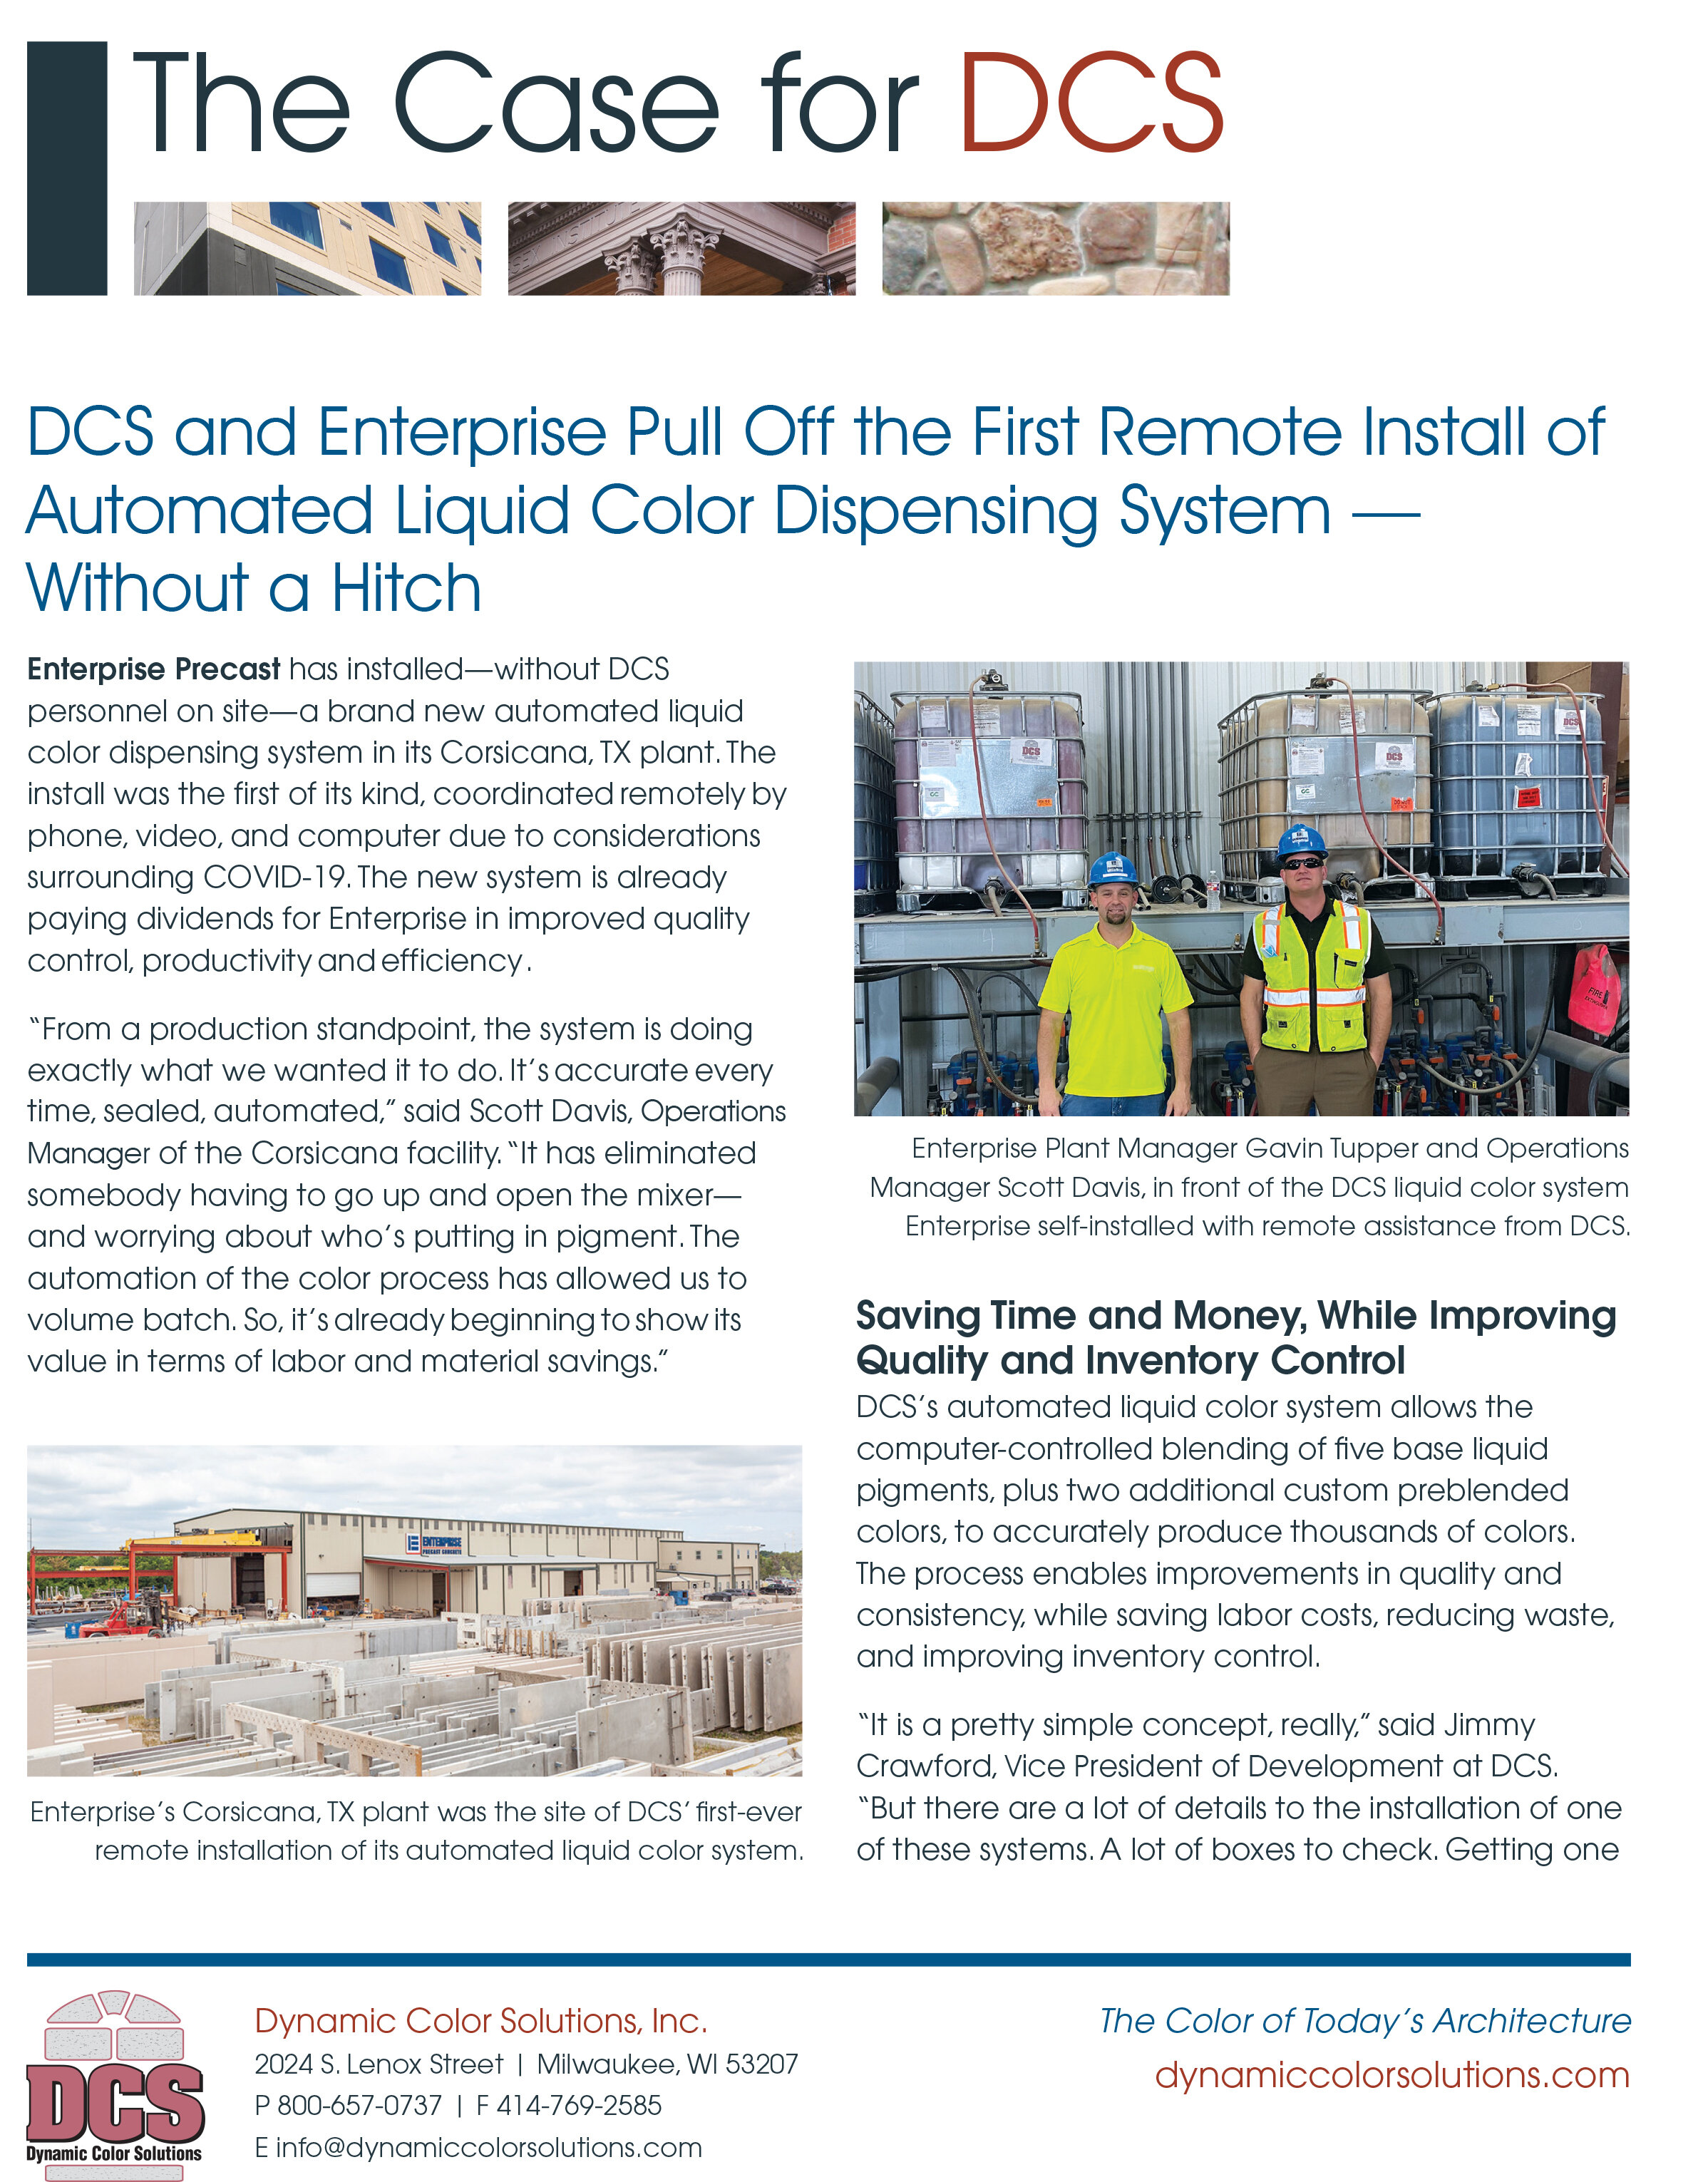 DCS & Enterprise Pull Off the First Remote Install of Automated Liquid ...